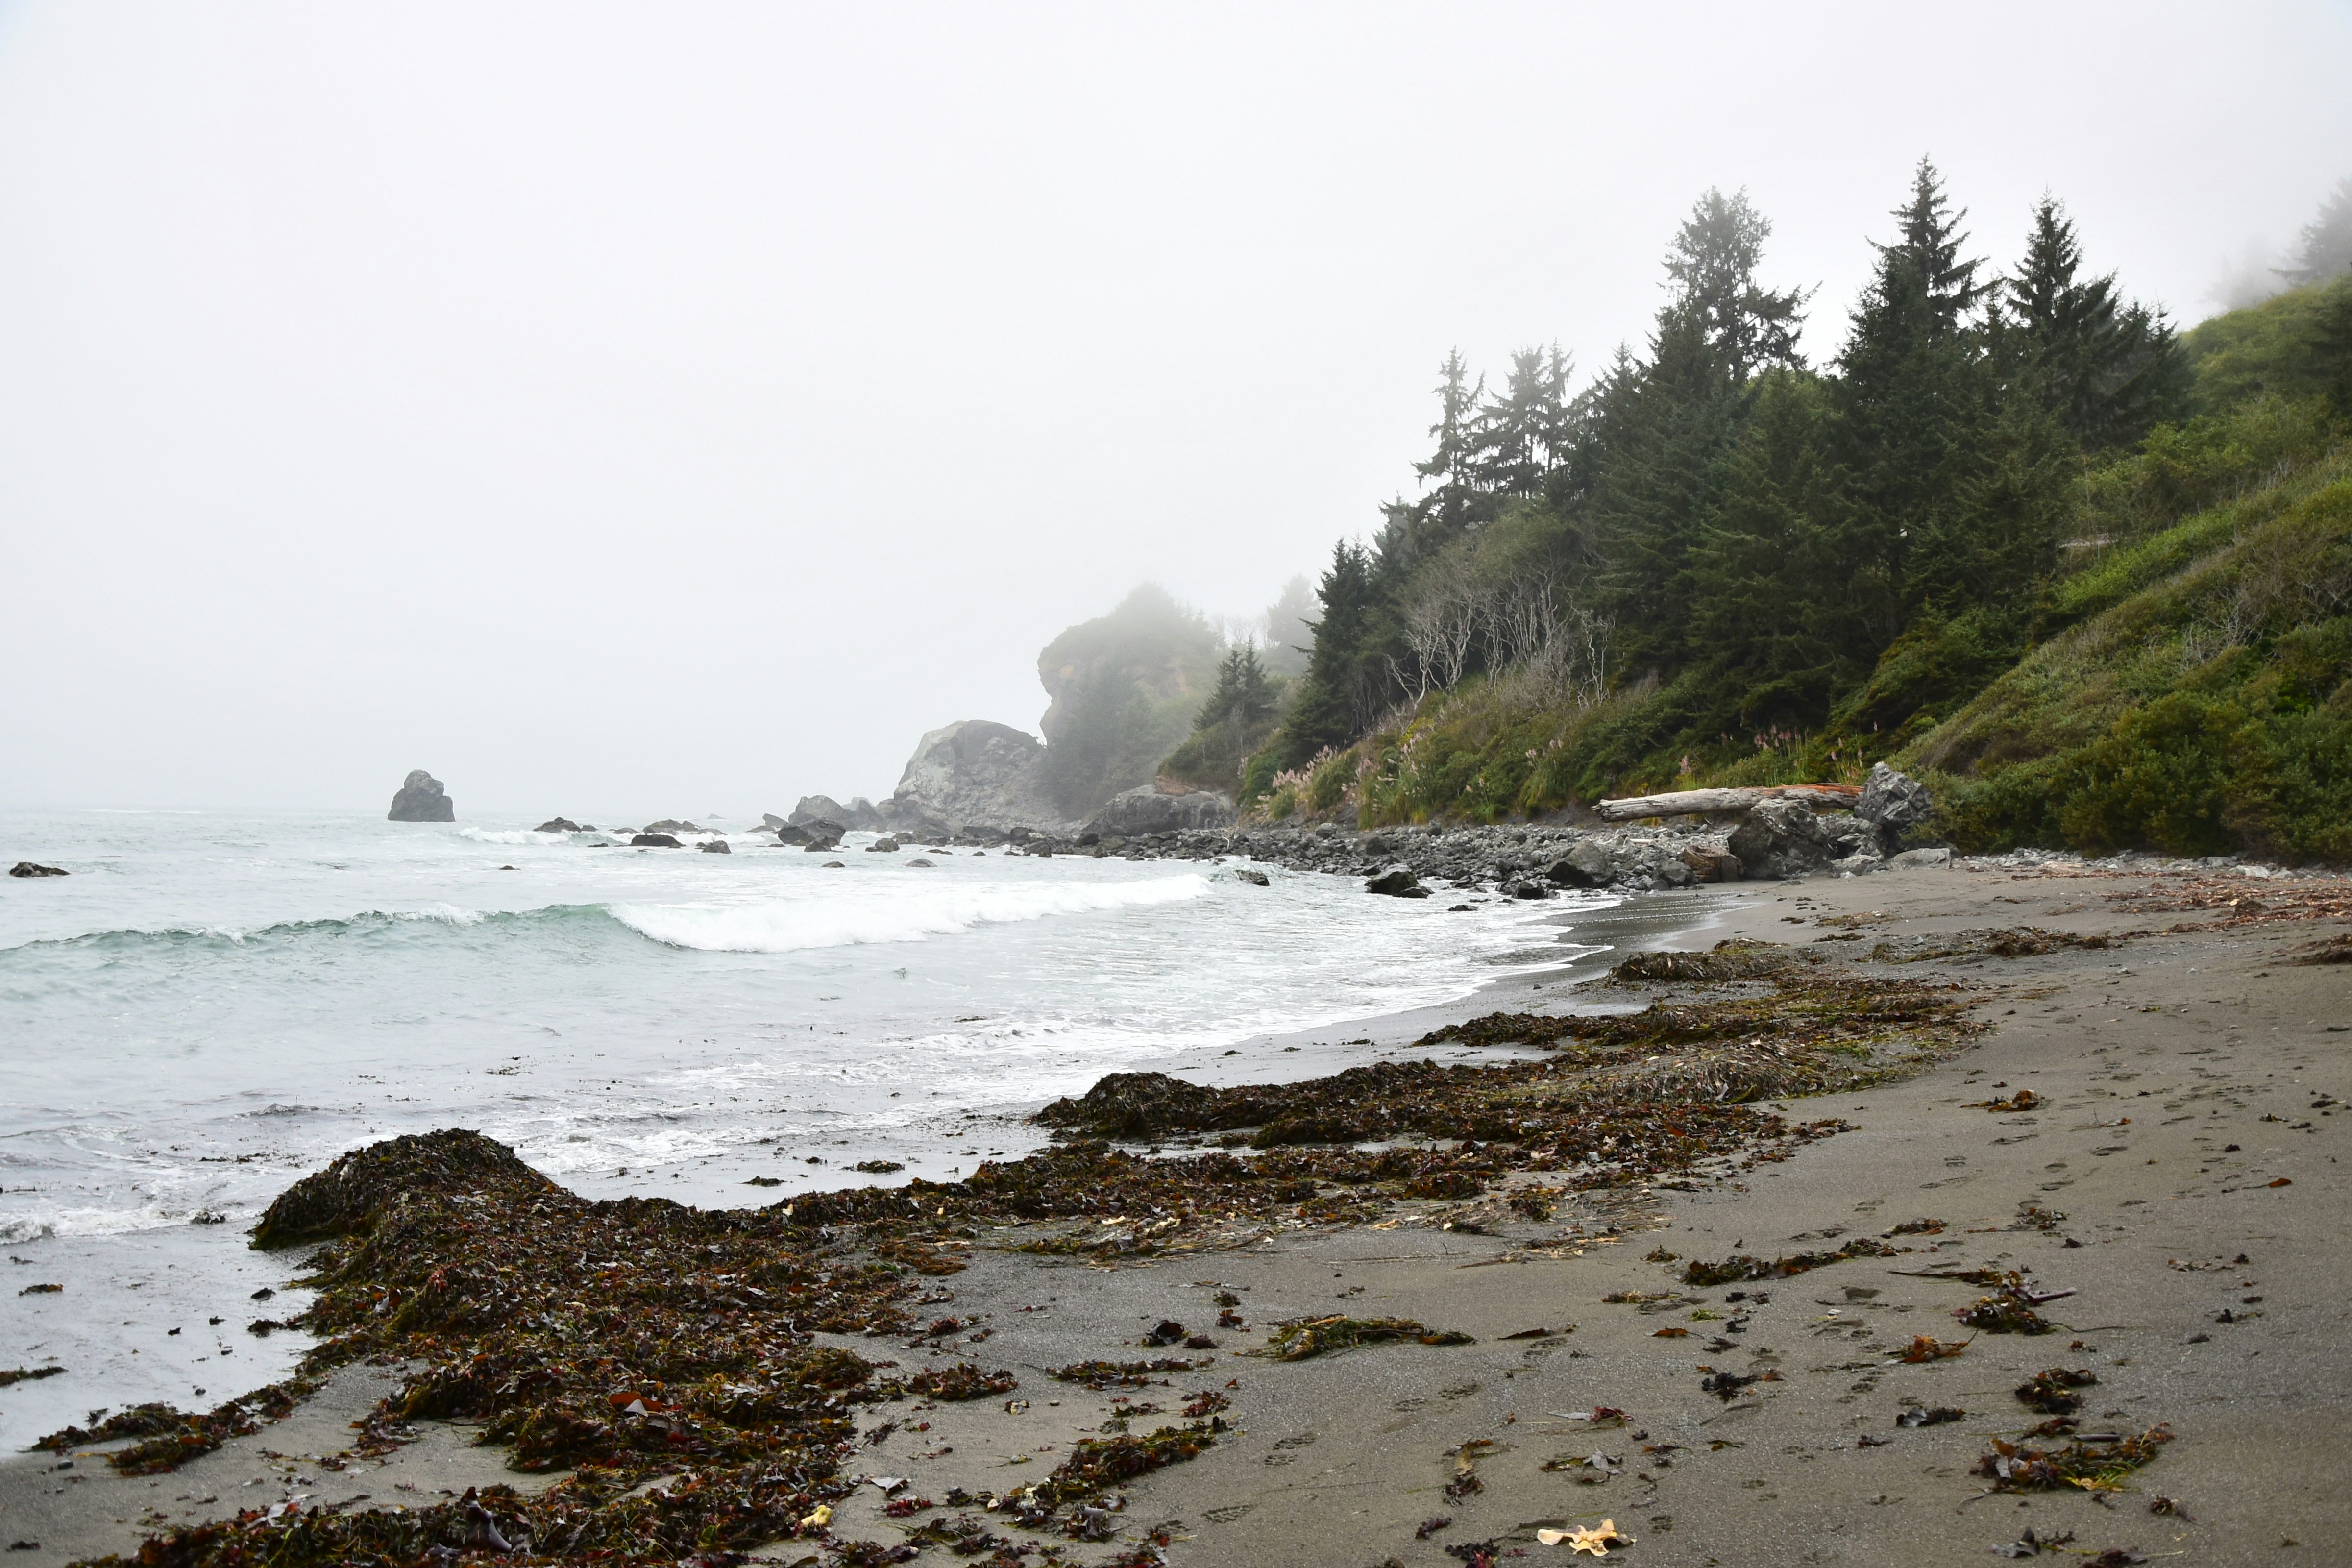 A light blue-grey Pacific Ocean meets the curve of the shoreline in Redwood Forest National Park, where the sand is dark grey and brownish red seaweed clumps on the left side of the frame. In the background, deep green headlands meet the beach, with stands of pine and spruce shrouded in a light fog. Large seastacks and boulders appear far in the background. SCUBA diving national parks